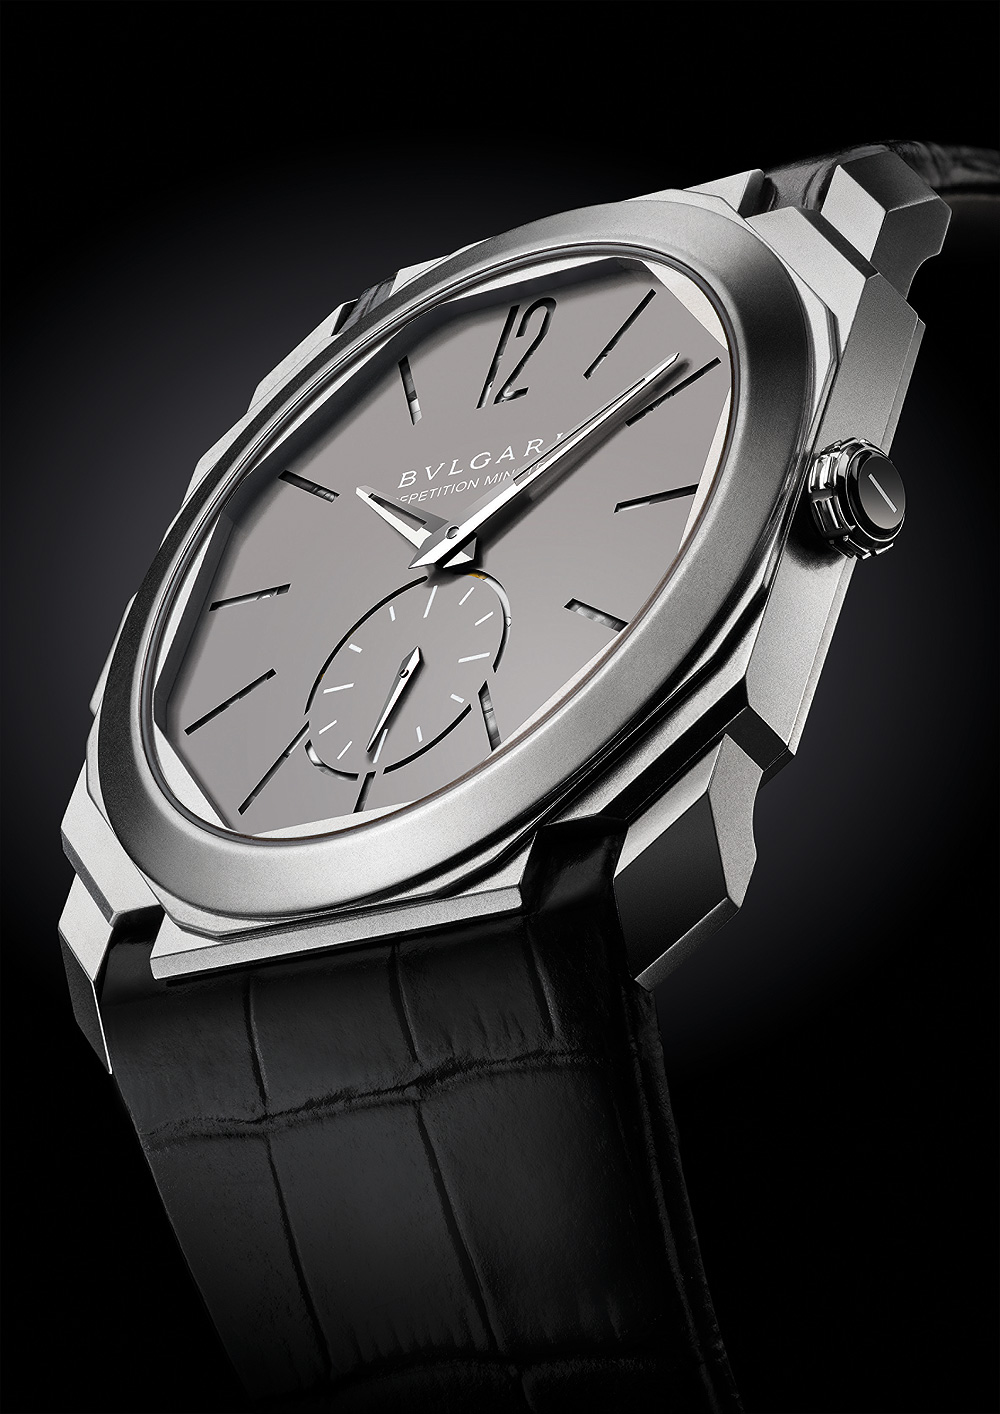 https://www.watchtime.com/wp-content/uploads/2016/03/Bulgari_Octo_Minute_Repeater_front-angle_1000.jpg